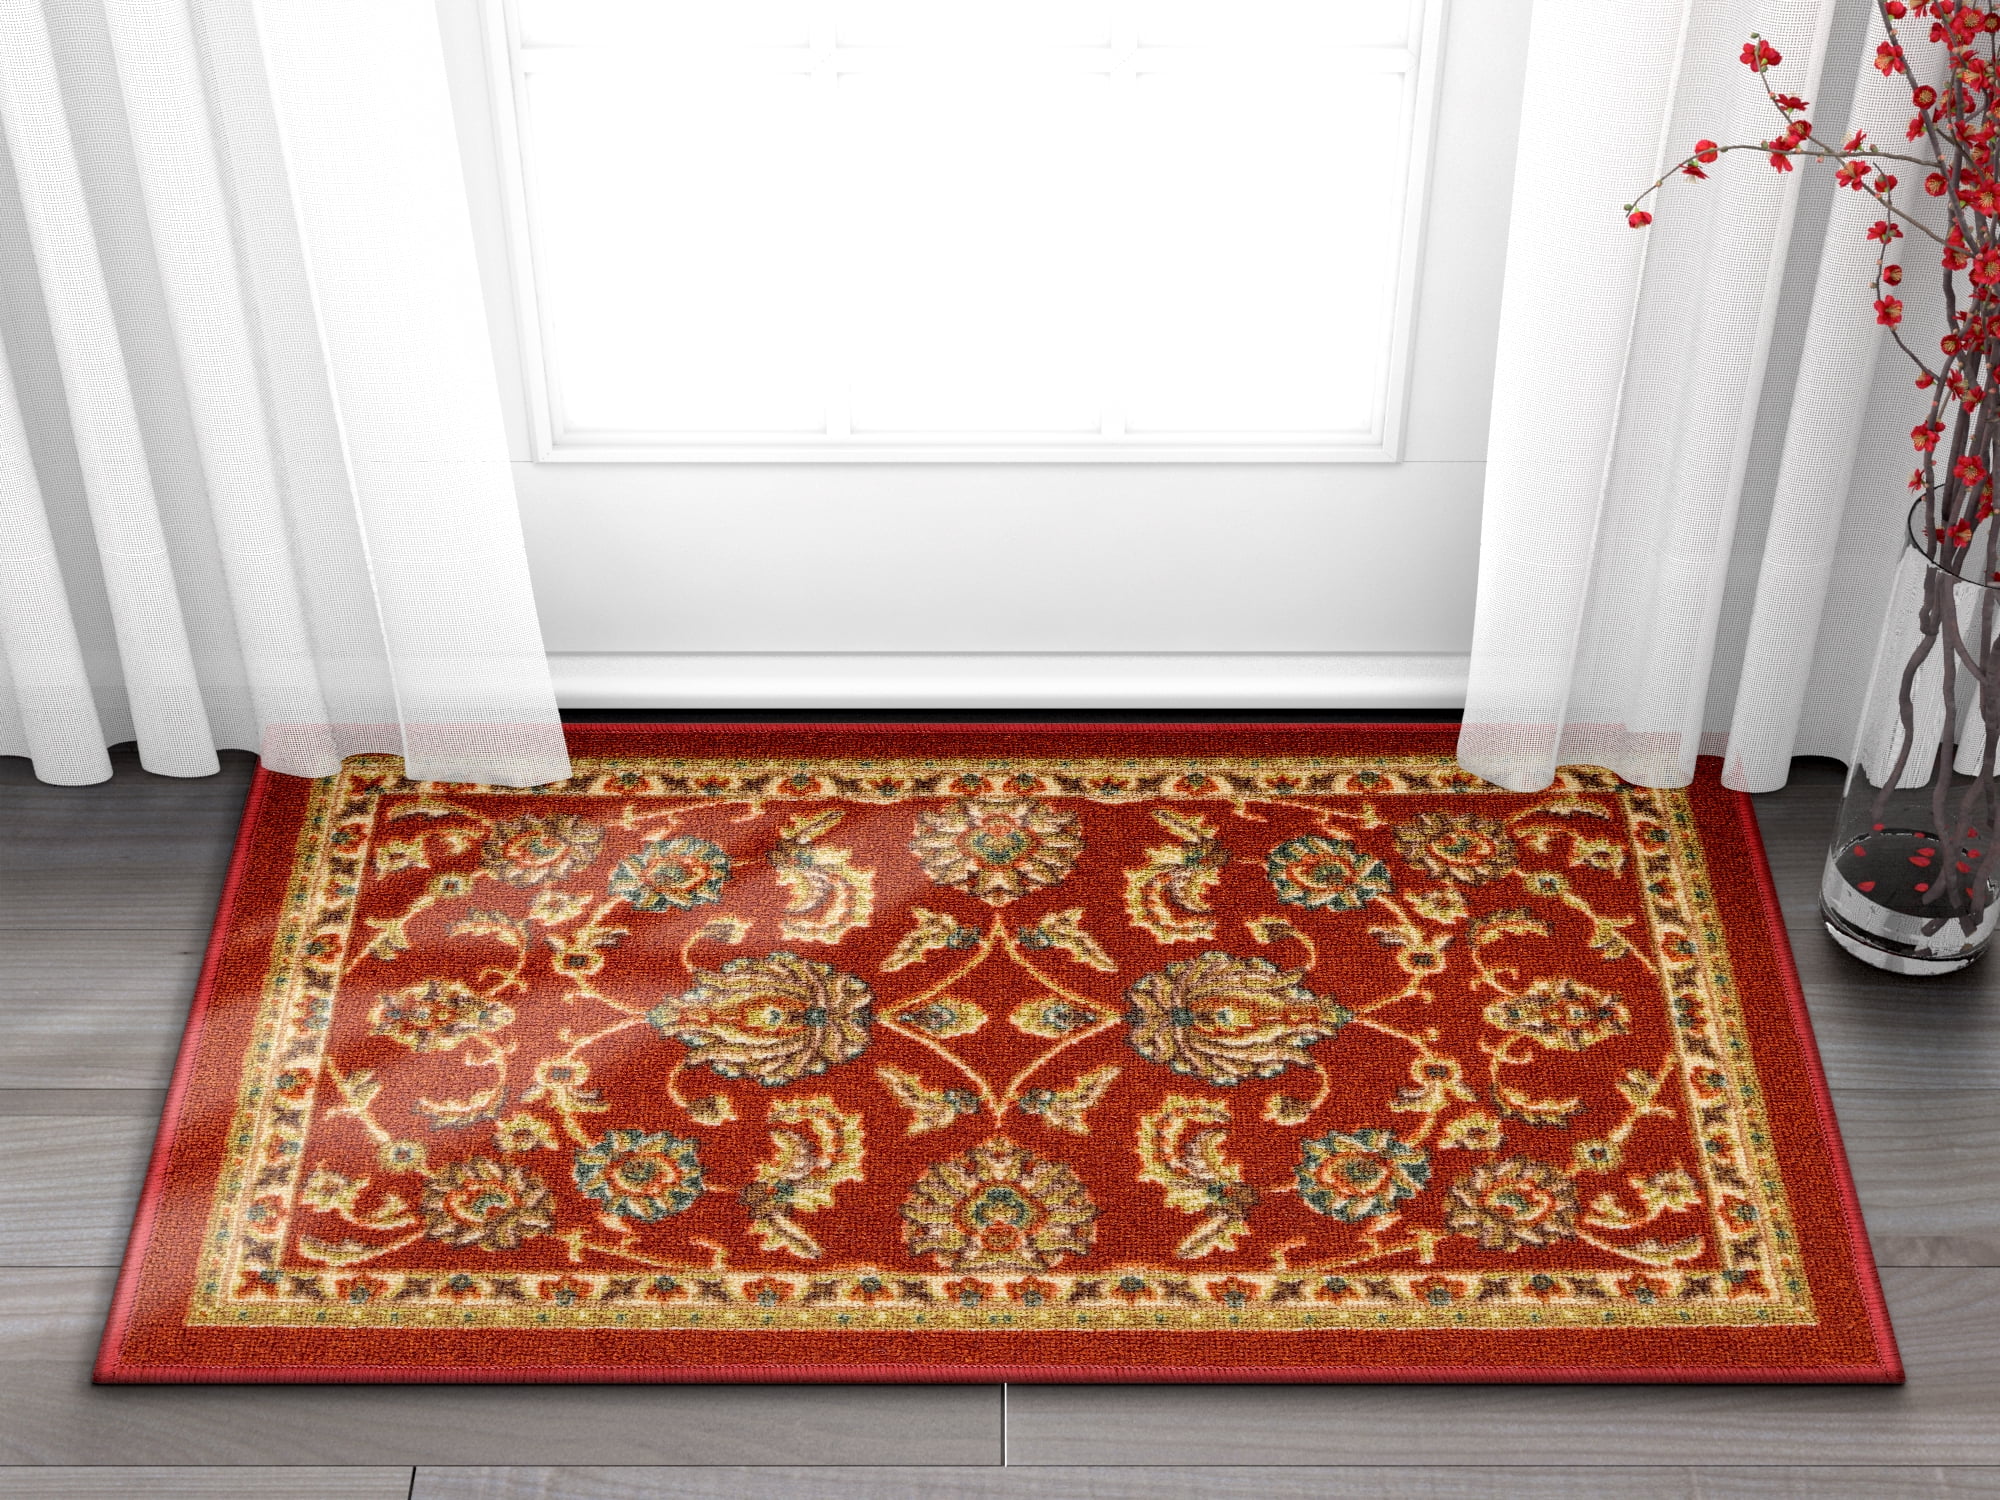 Specialized in Machine Washable Door mat COSY HOMEER Entry Rugs Made of 100% Polyester TPR Backing 36X24inch, Beige 